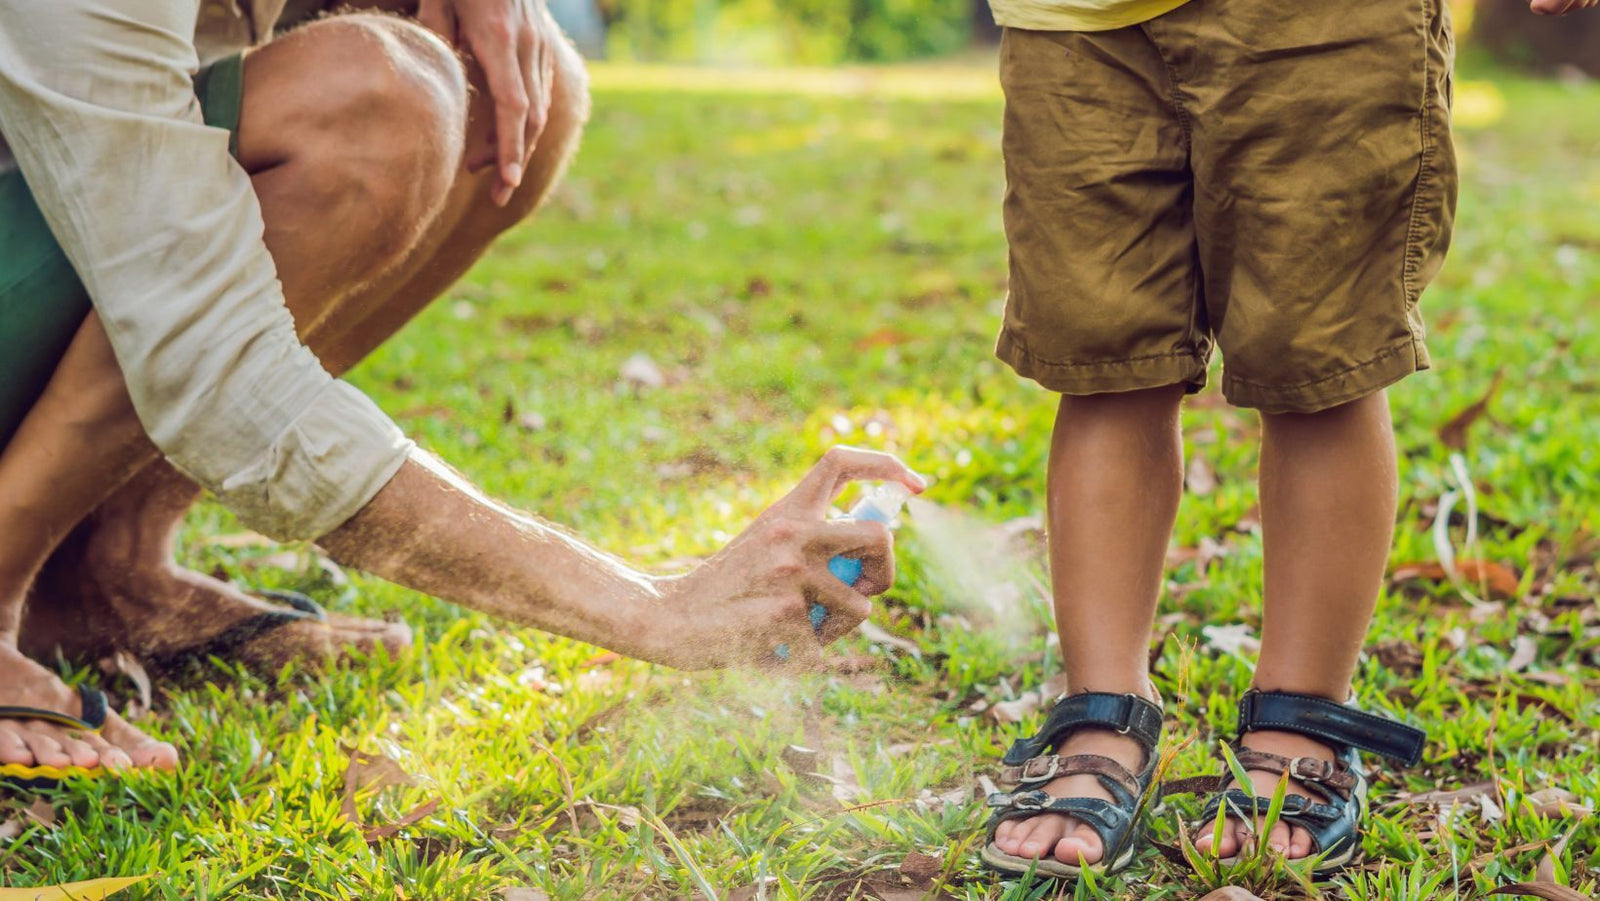 How to Use Insect Repellent Safely on Kids